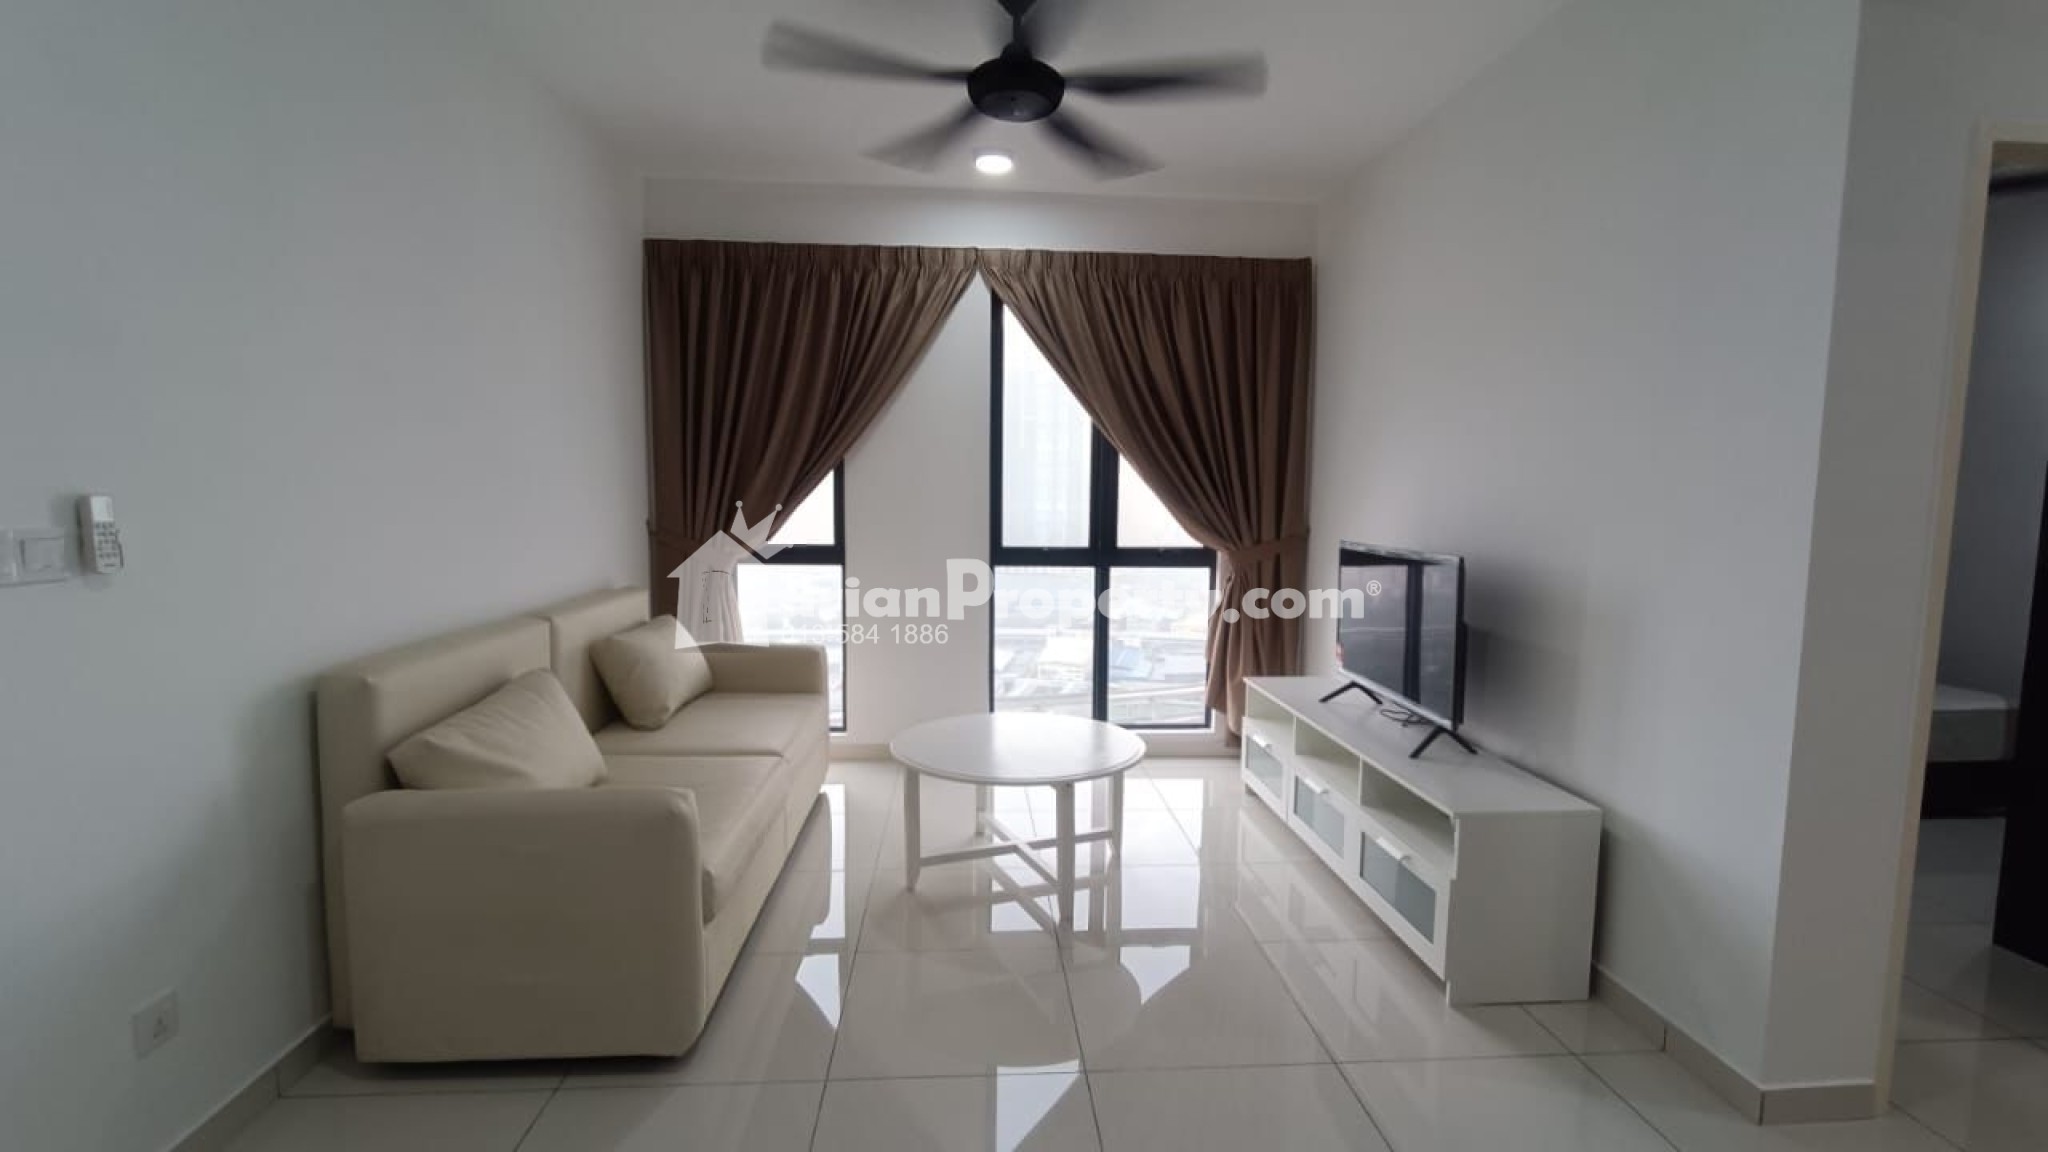 Condo For Rent at Damai Residence